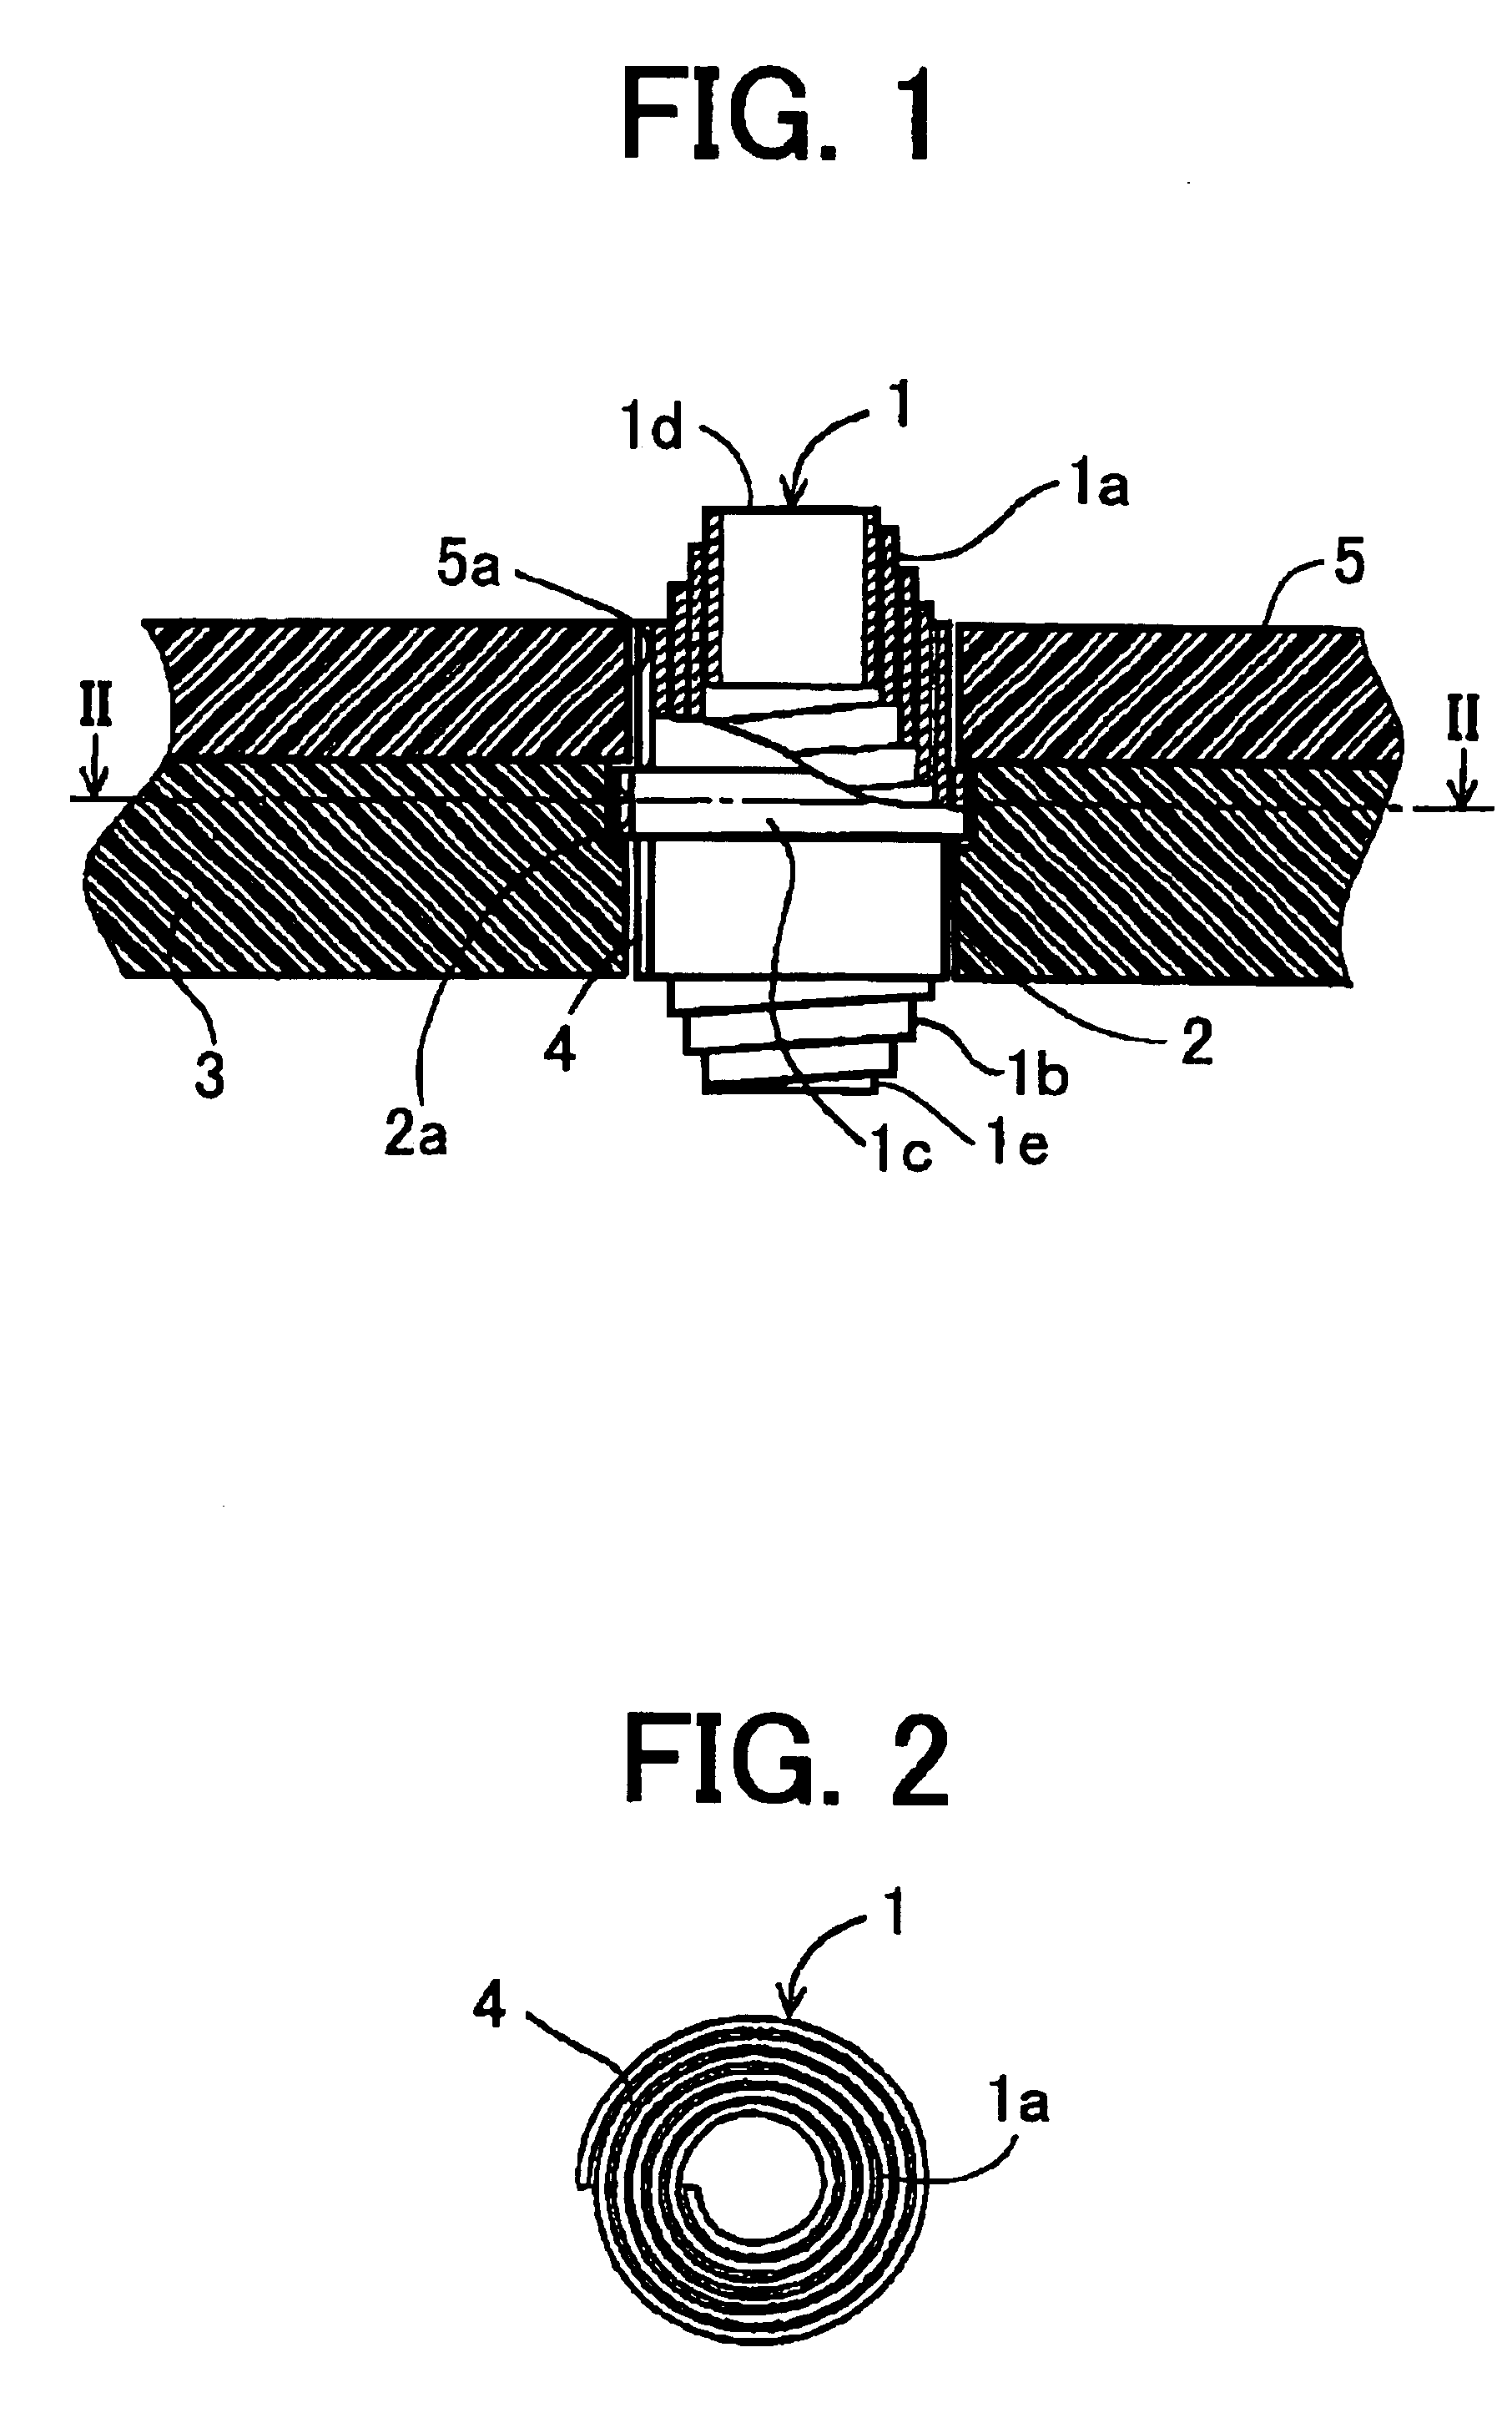 Electric connector for connecting electronic instruments